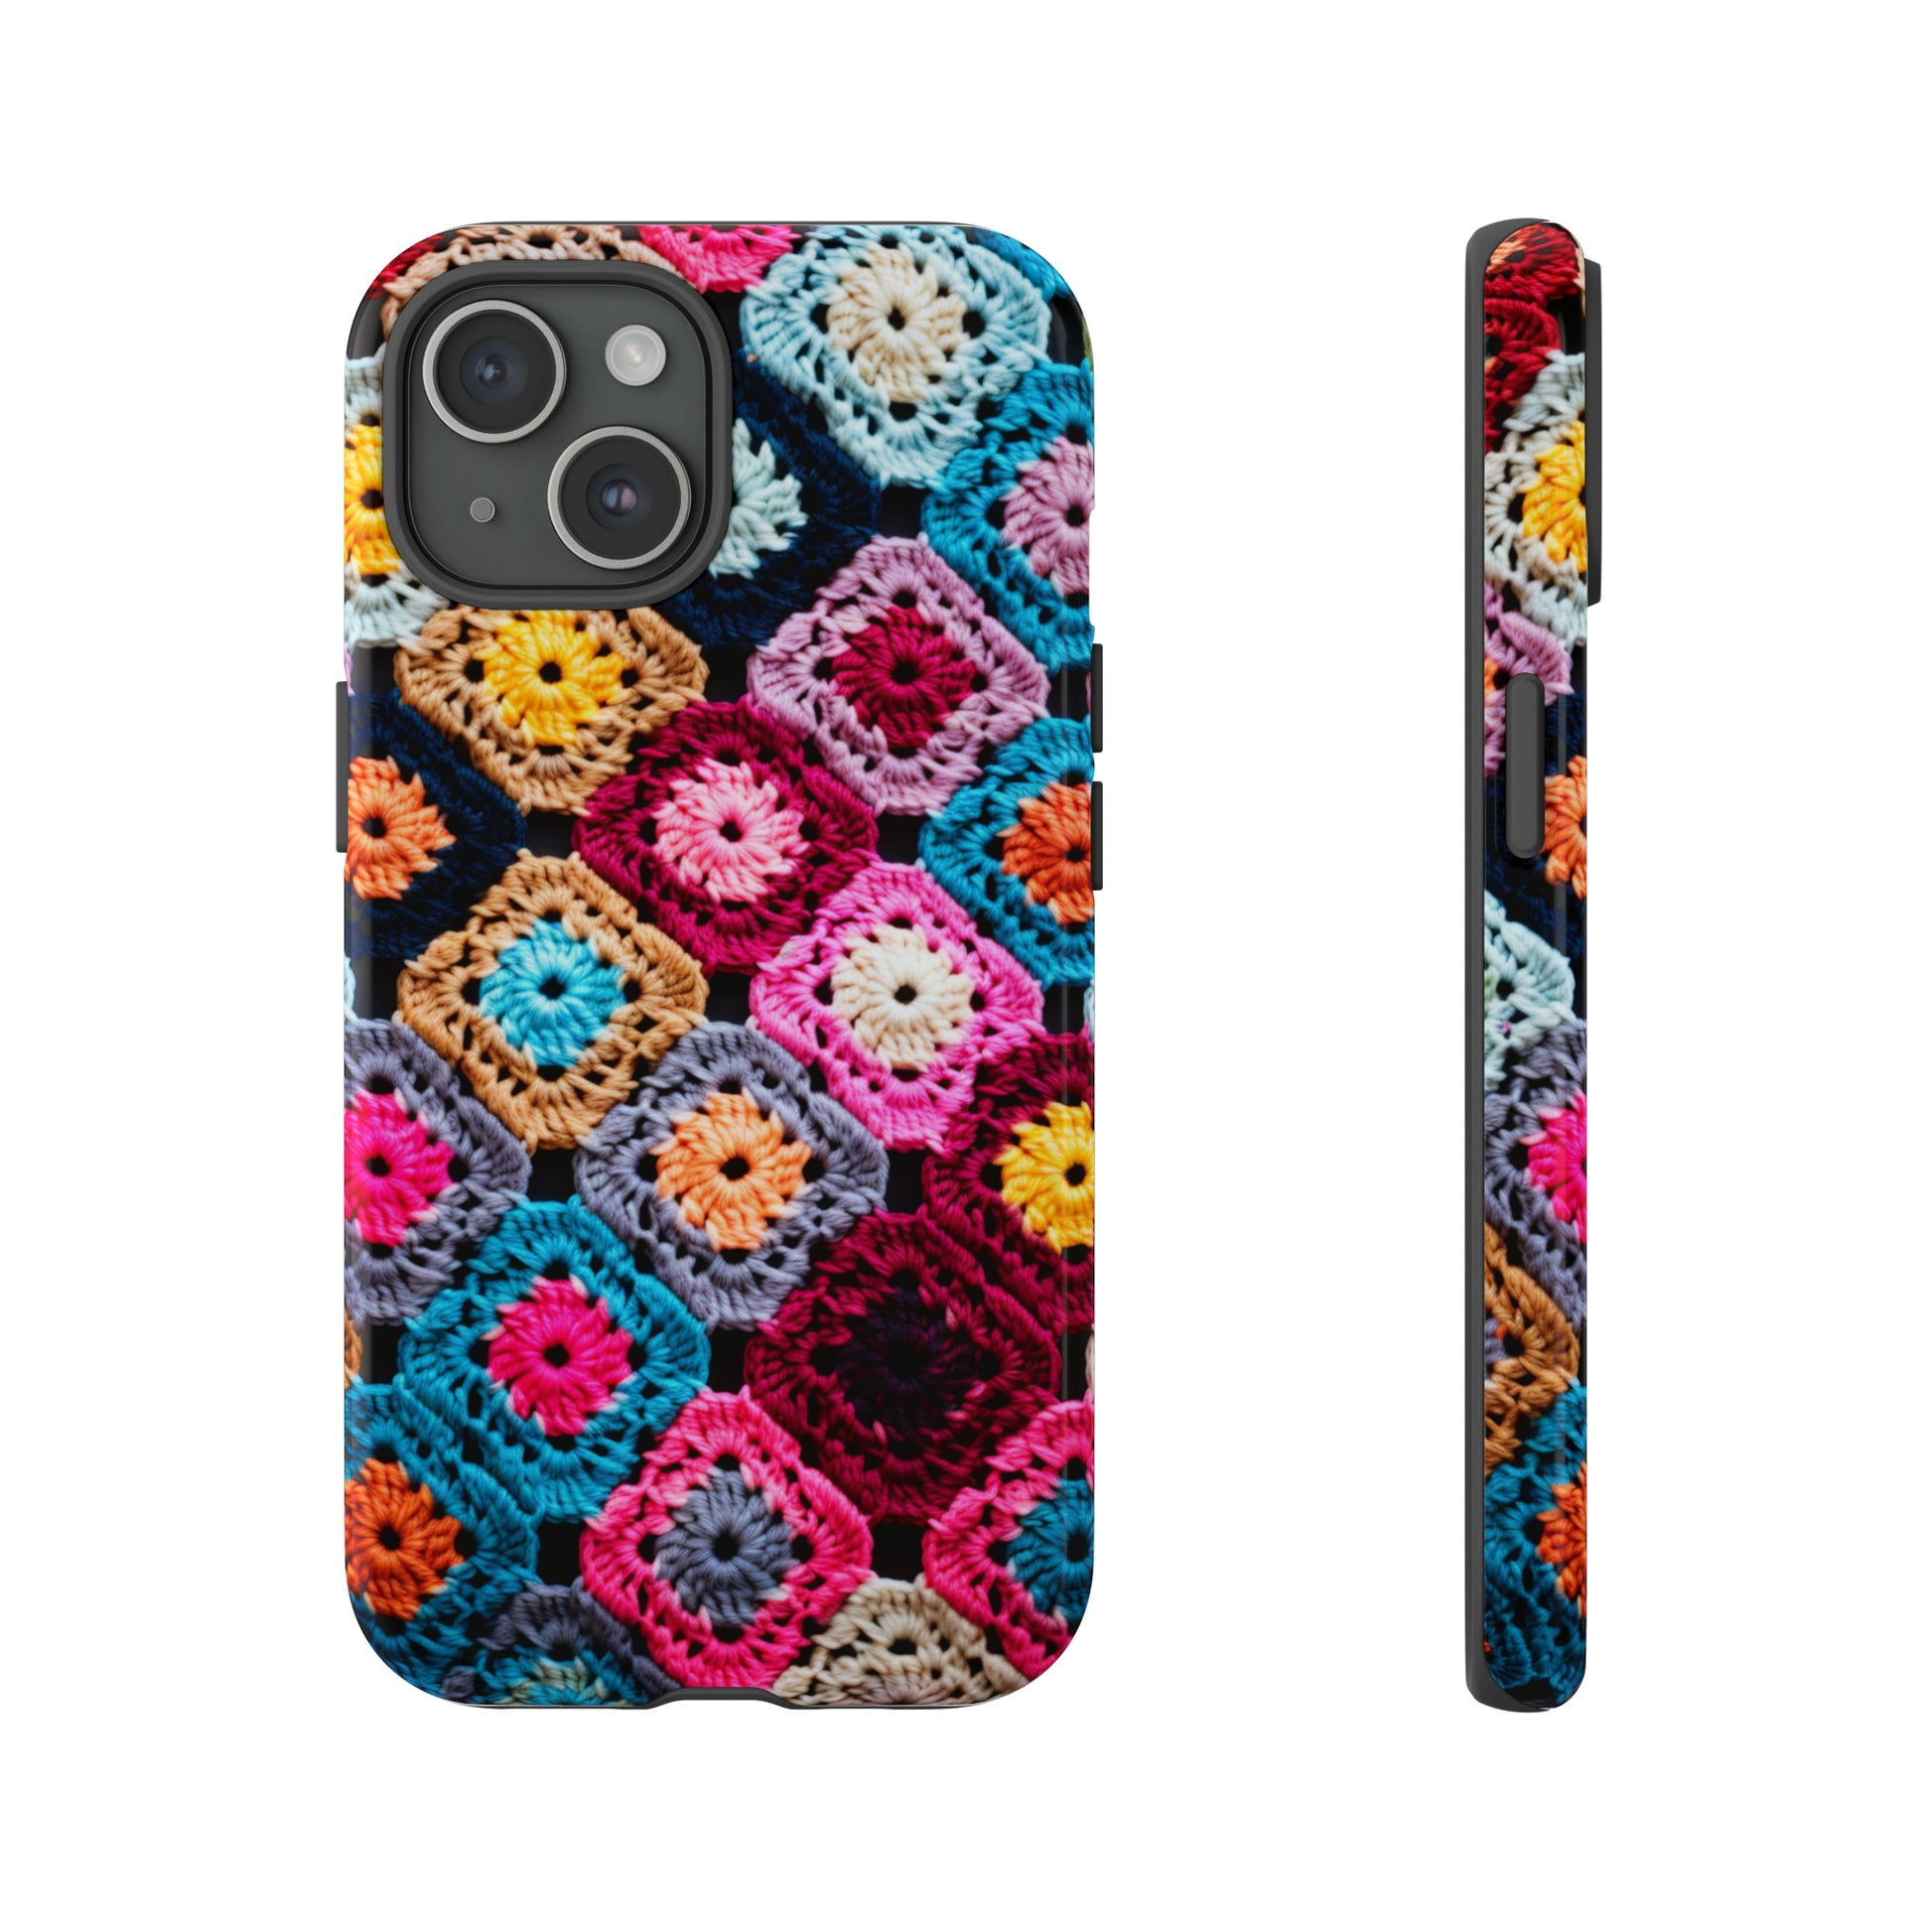 Faux knit granny square phone case in warm fall colors